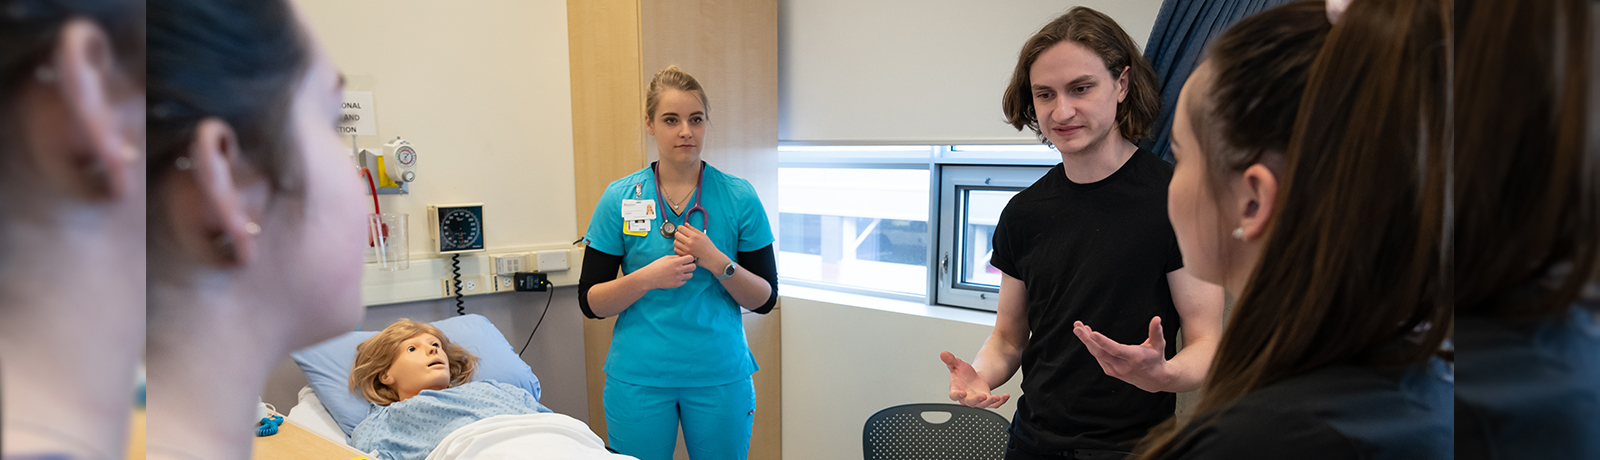 Nursing students complete a simulation exercise